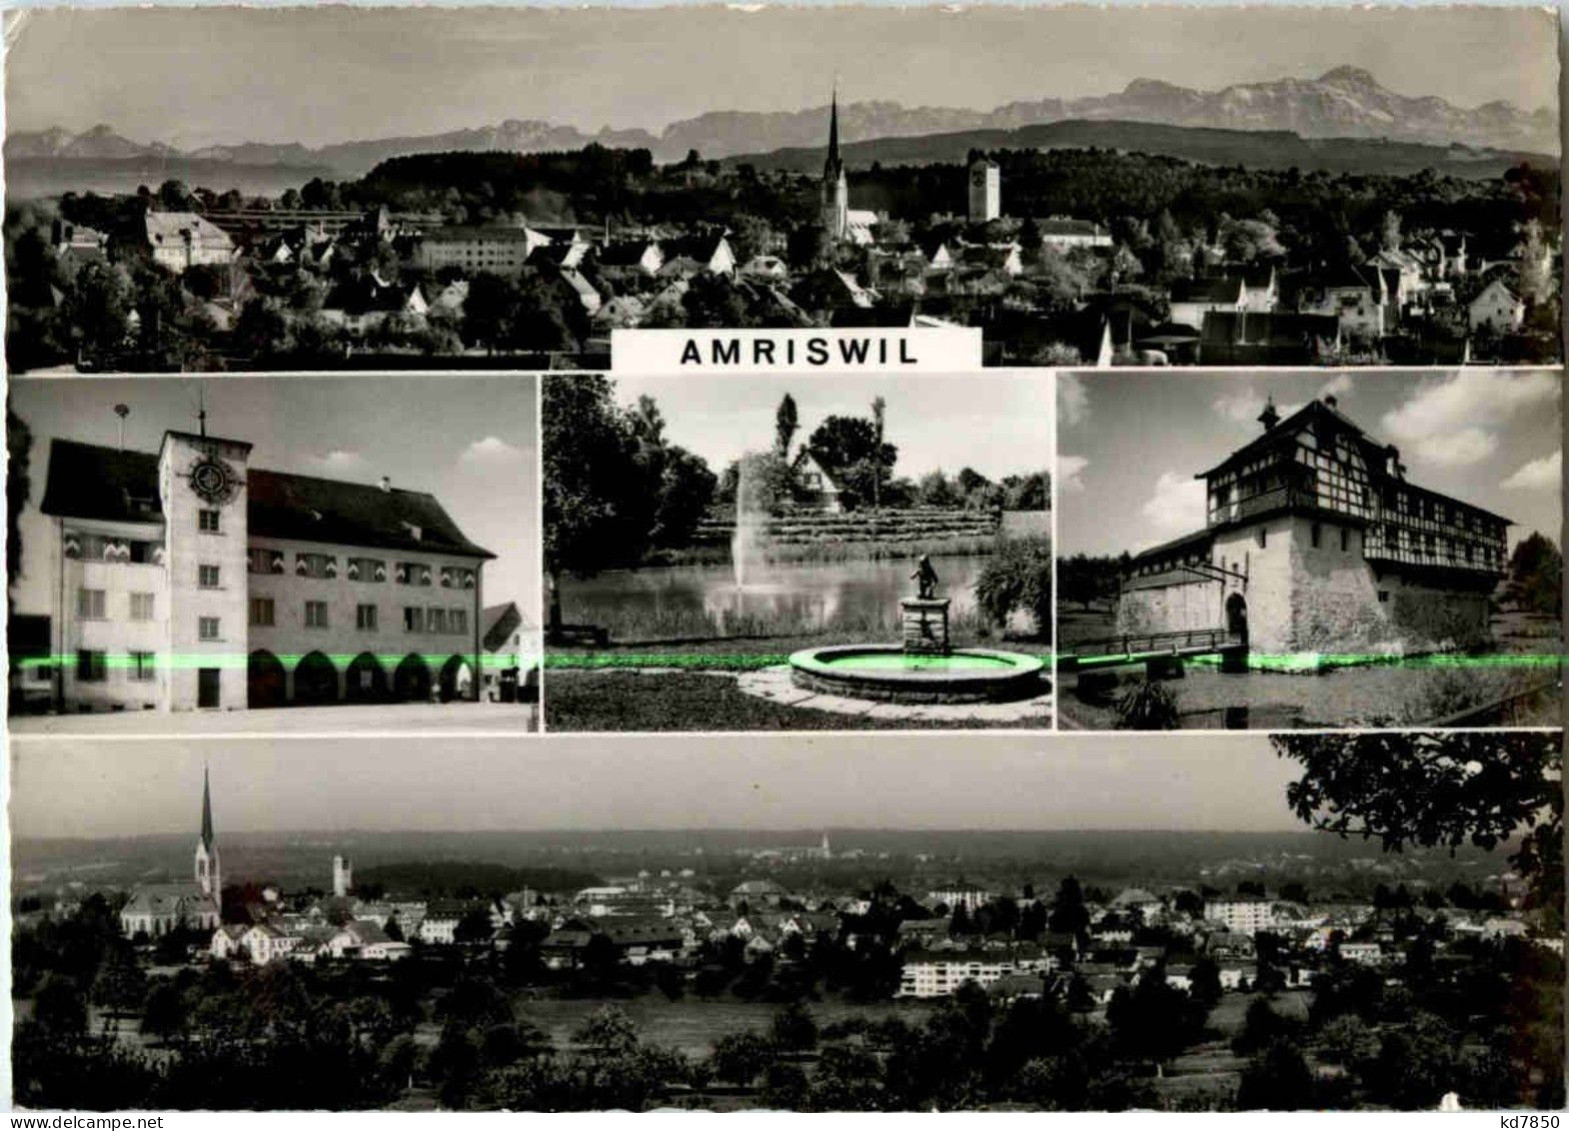 Amriswil - Amriswil